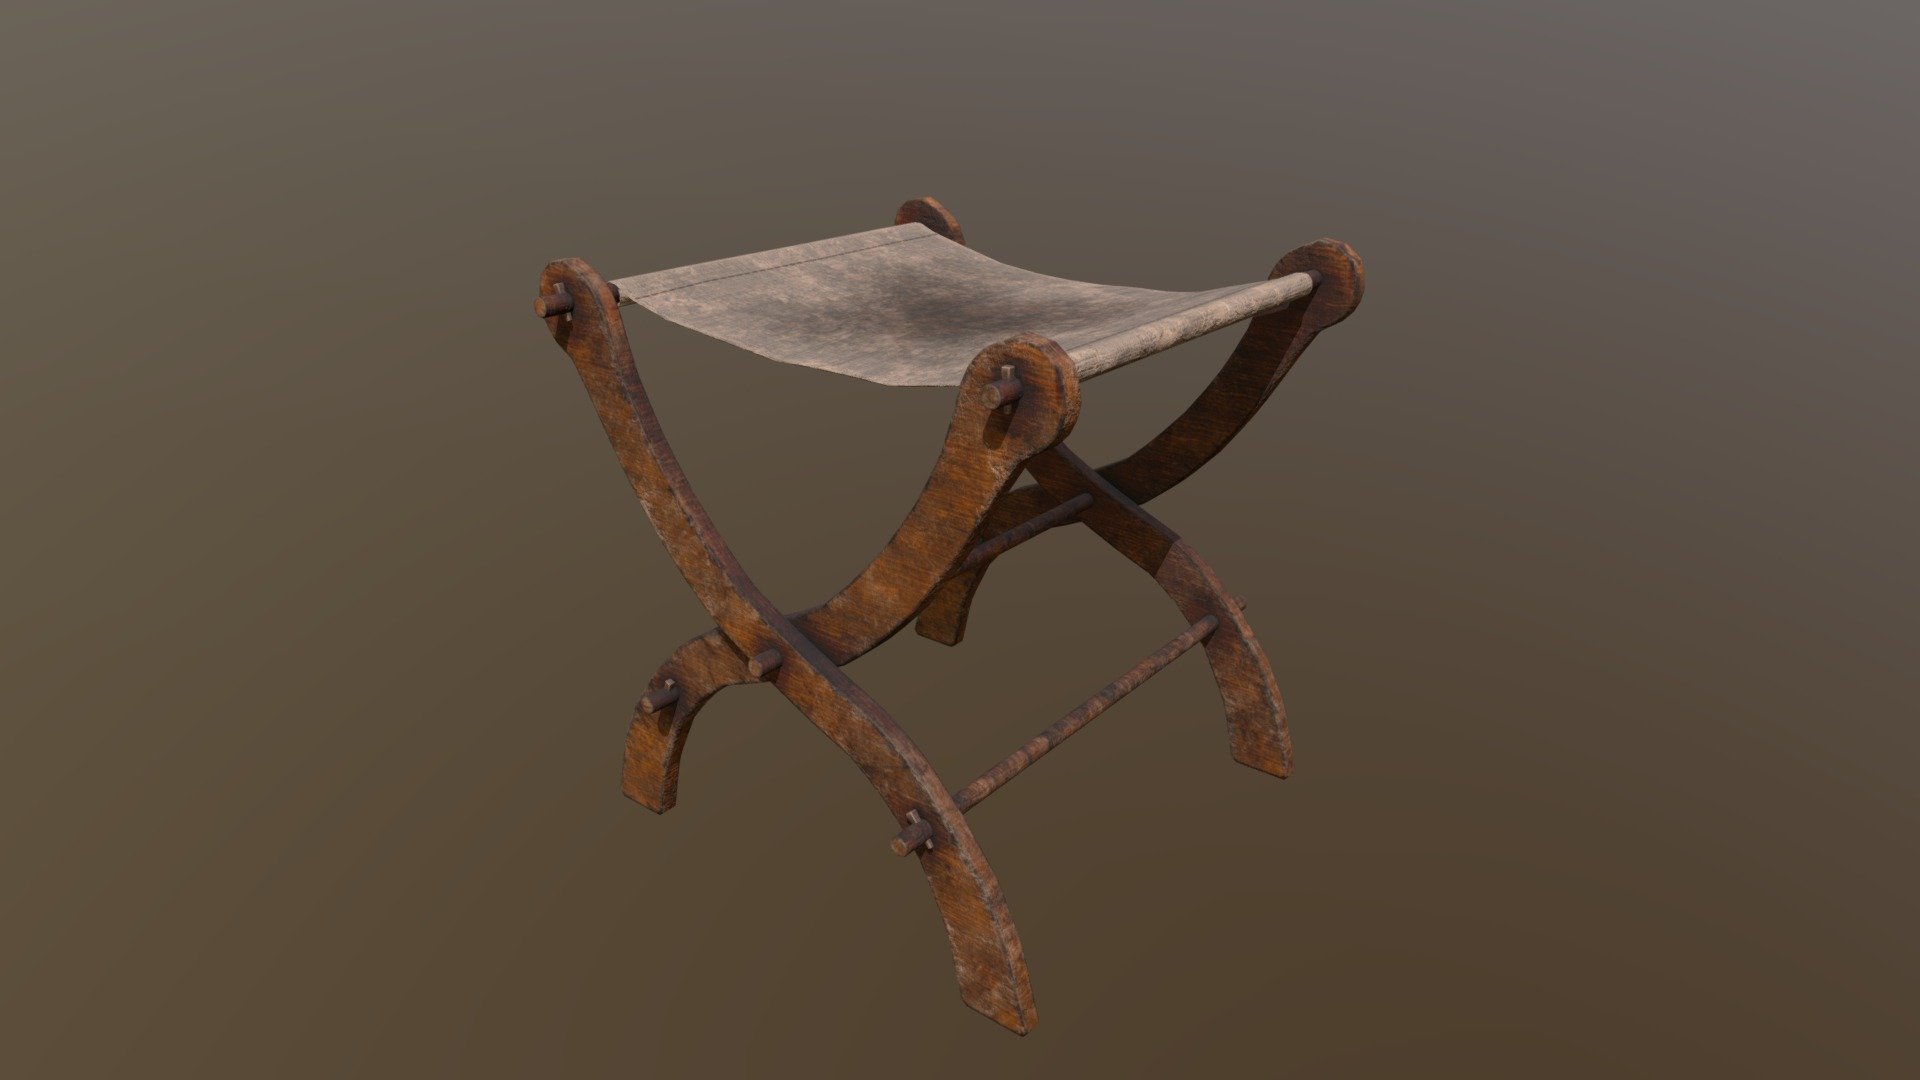 Old Medieval Stool - Chair 3D Model. This model contains the Old Medieval Stool - Chair itself

All modeled in Maya, textured with Substance Painter.

The model was built to scale and is UV unwrapped properly. Contains only one 4K texture set.

⦁ 6096 tris.

⦁ Contains: .FBX .OBJ and .DAE

⦁ Model has clean topology. No Ngons.

⦁ Built to scale

⦁ Unwrapped UV Map

⦁ 4K Texture set

⦁ High quality details

⦁ Based on real life references

⦁ Renders done in Marmoset Toolbag

Polycount:

Verts 3084

Edges 6240

Faces 3192

Tris 6096

If you have any questions please feel free to ask me 3d model